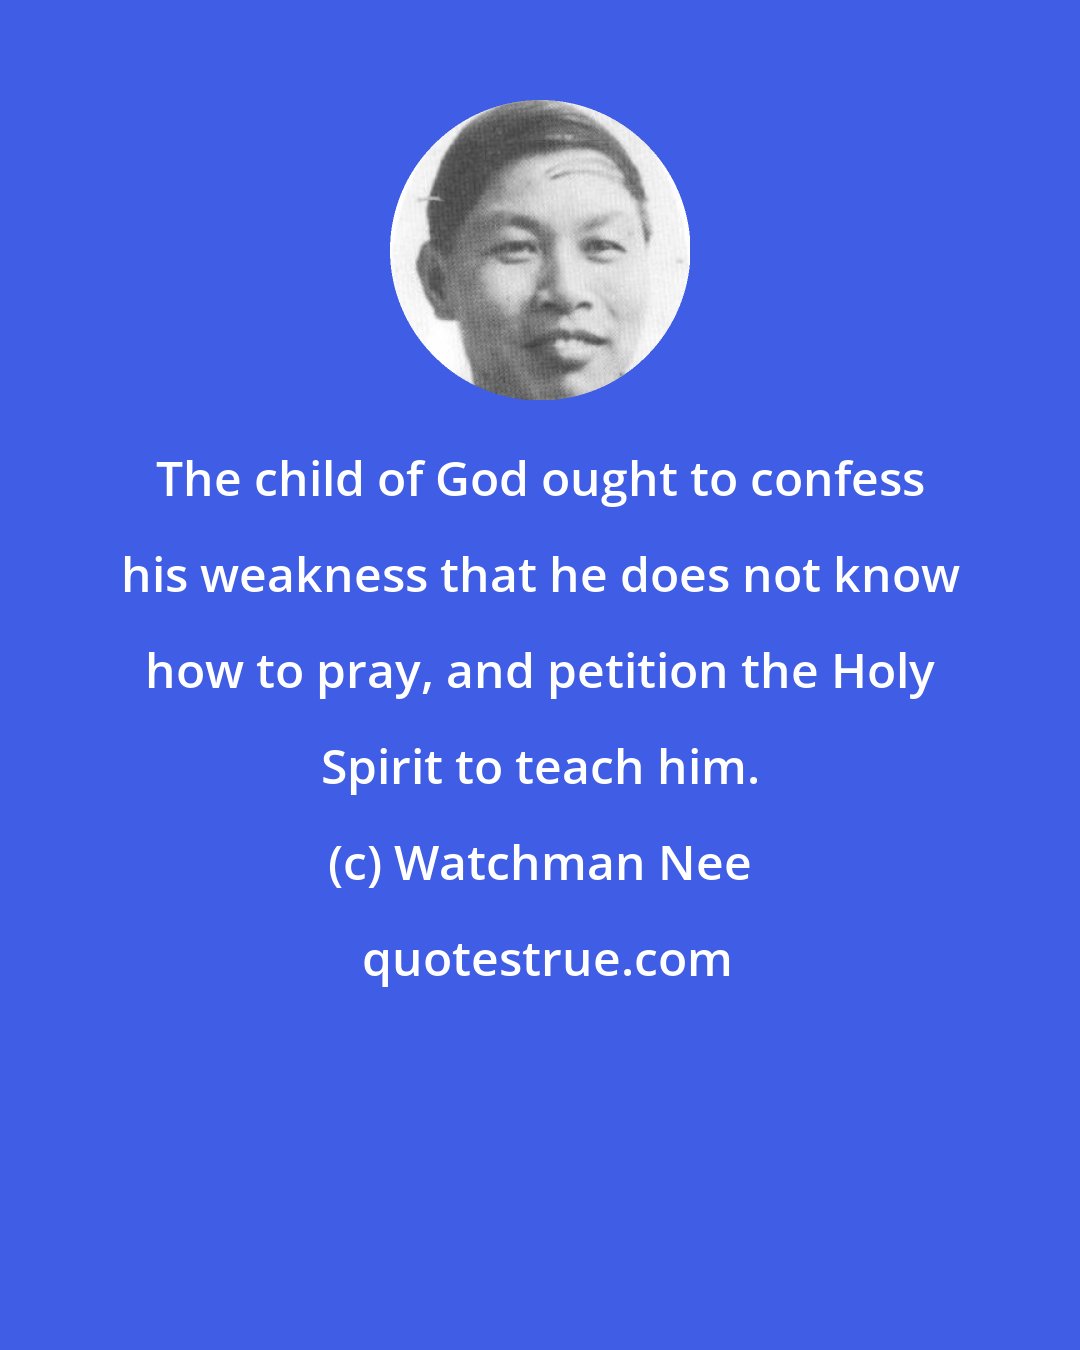 Watchman Nee: The child of God ought to confess his weakness that he does not know how to pray, and petition the Holy Spirit to teach him.